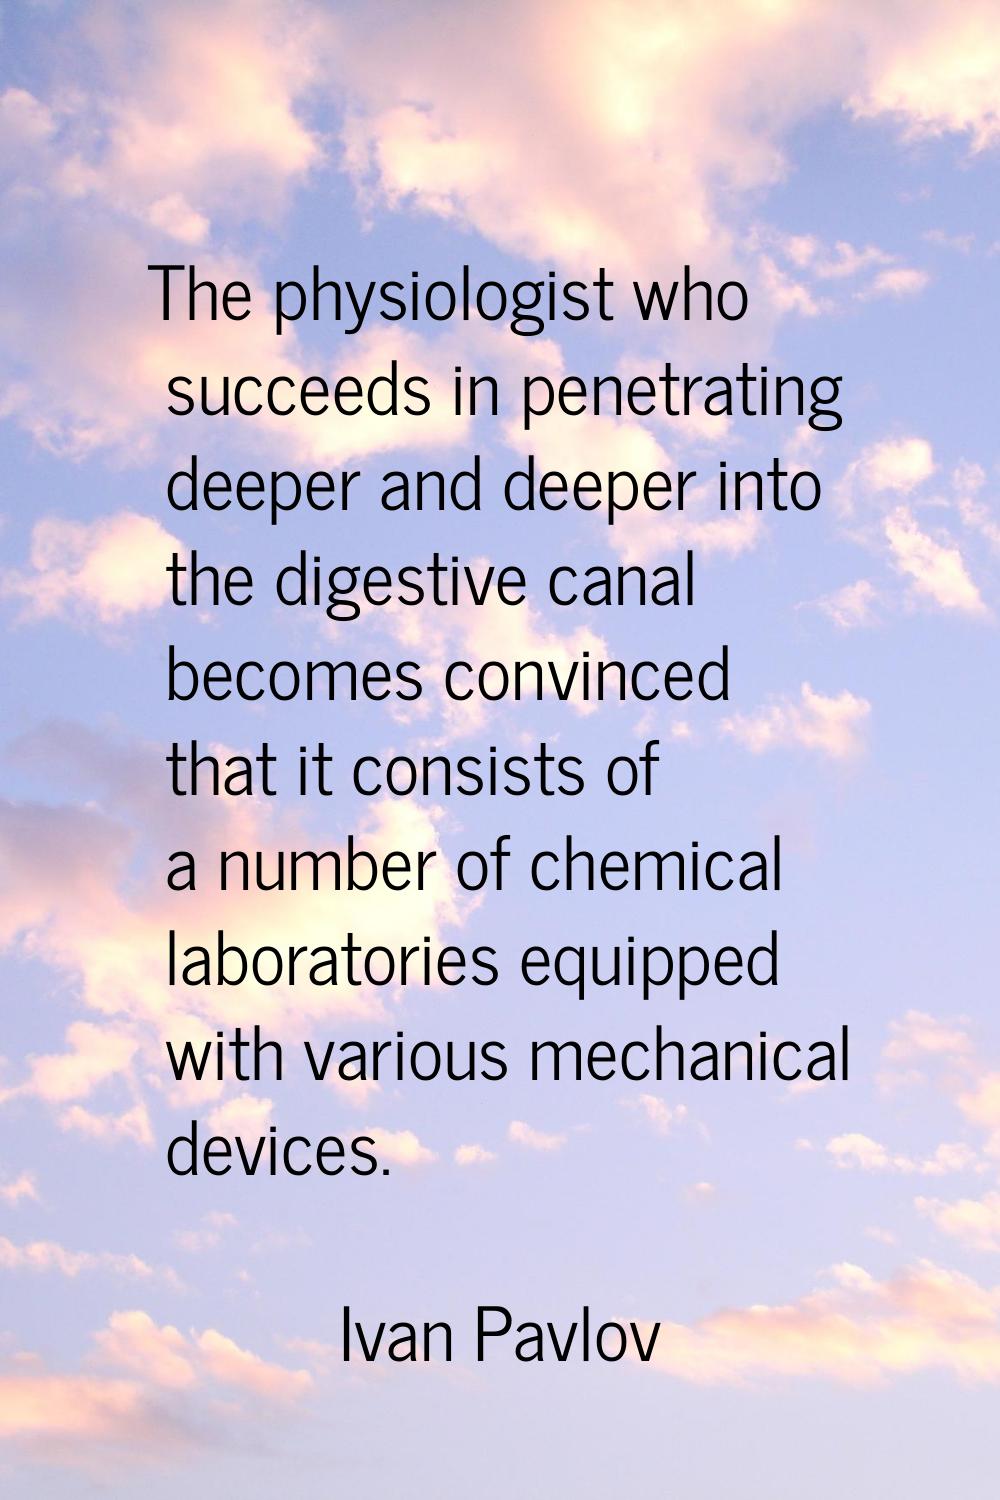 The physiologist who succeeds in penetrating deeper and deeper into the digestive canal becomes con